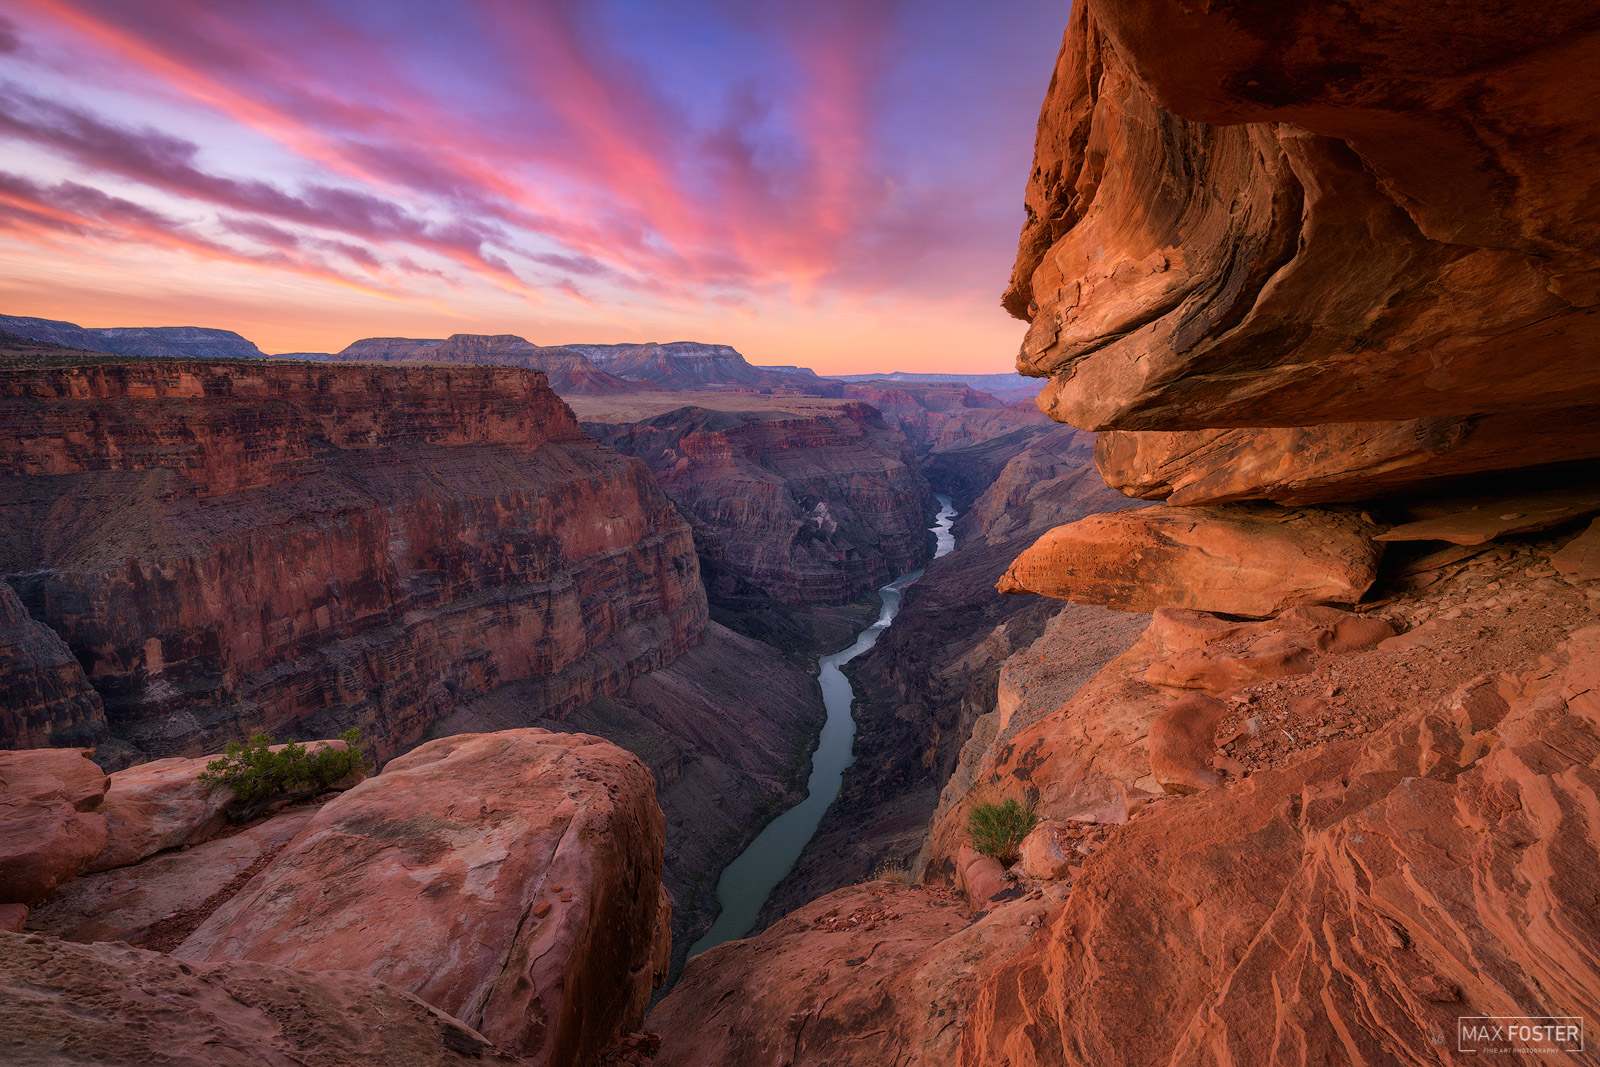 Rim to Rim, Toroweap Overlook, Grand Canyon National Park. Photo copyright by Max Foster